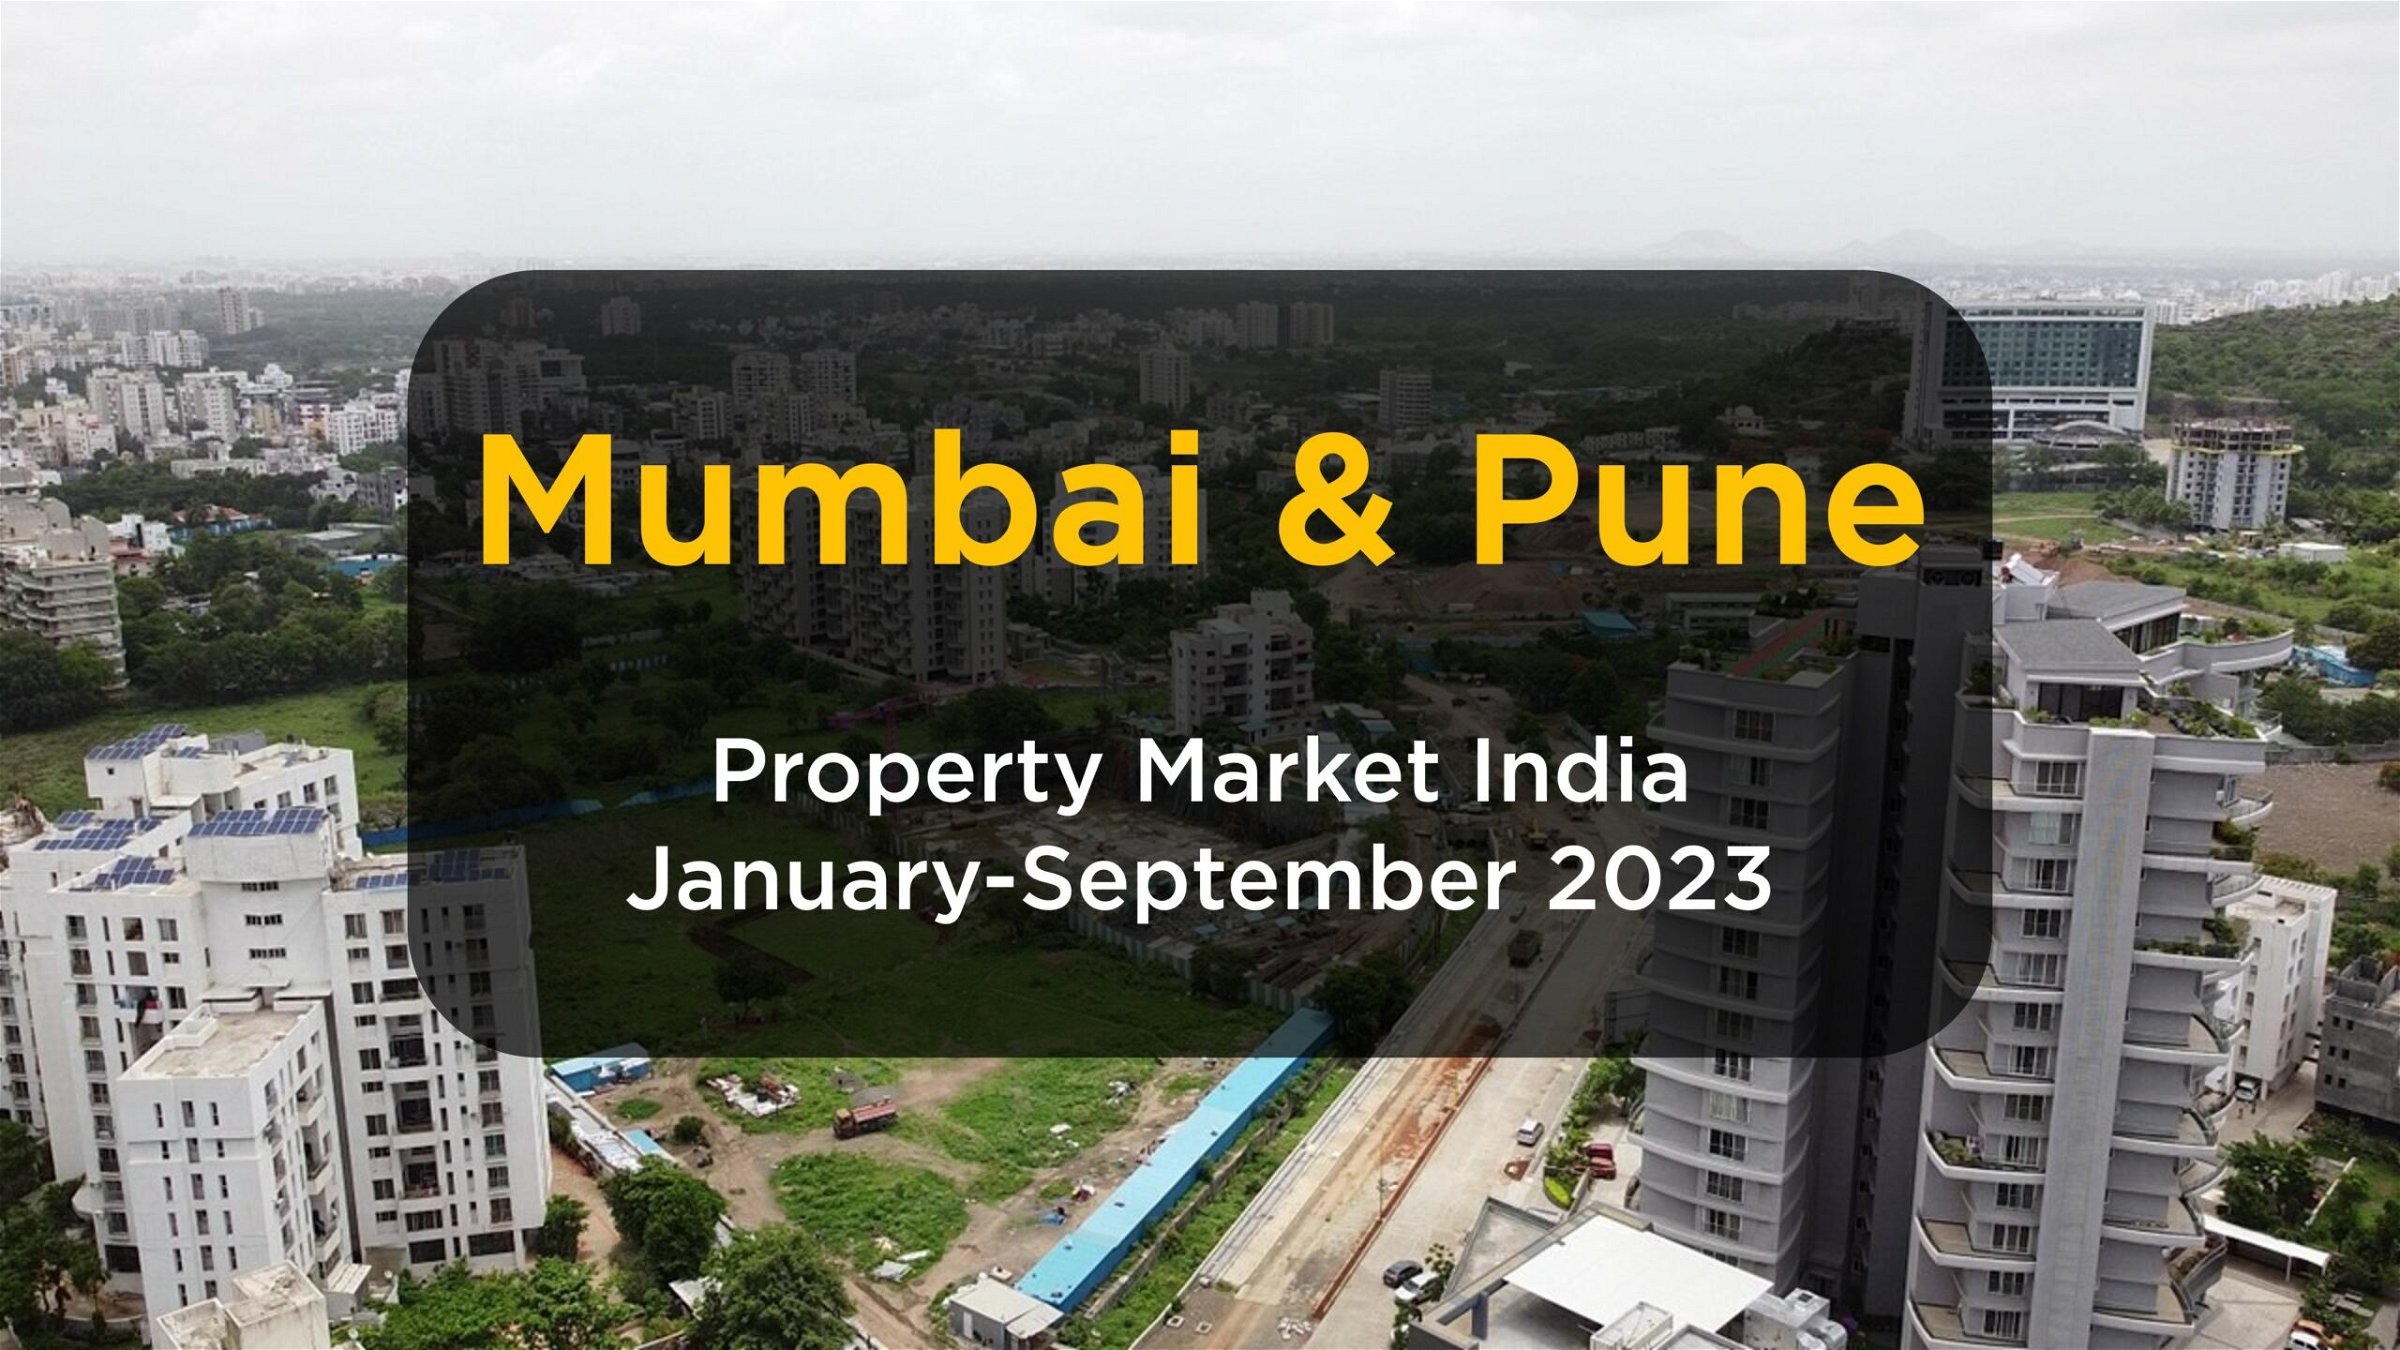 Will Mumbai and Pune continue to dominate India's property market in the coming quarters?